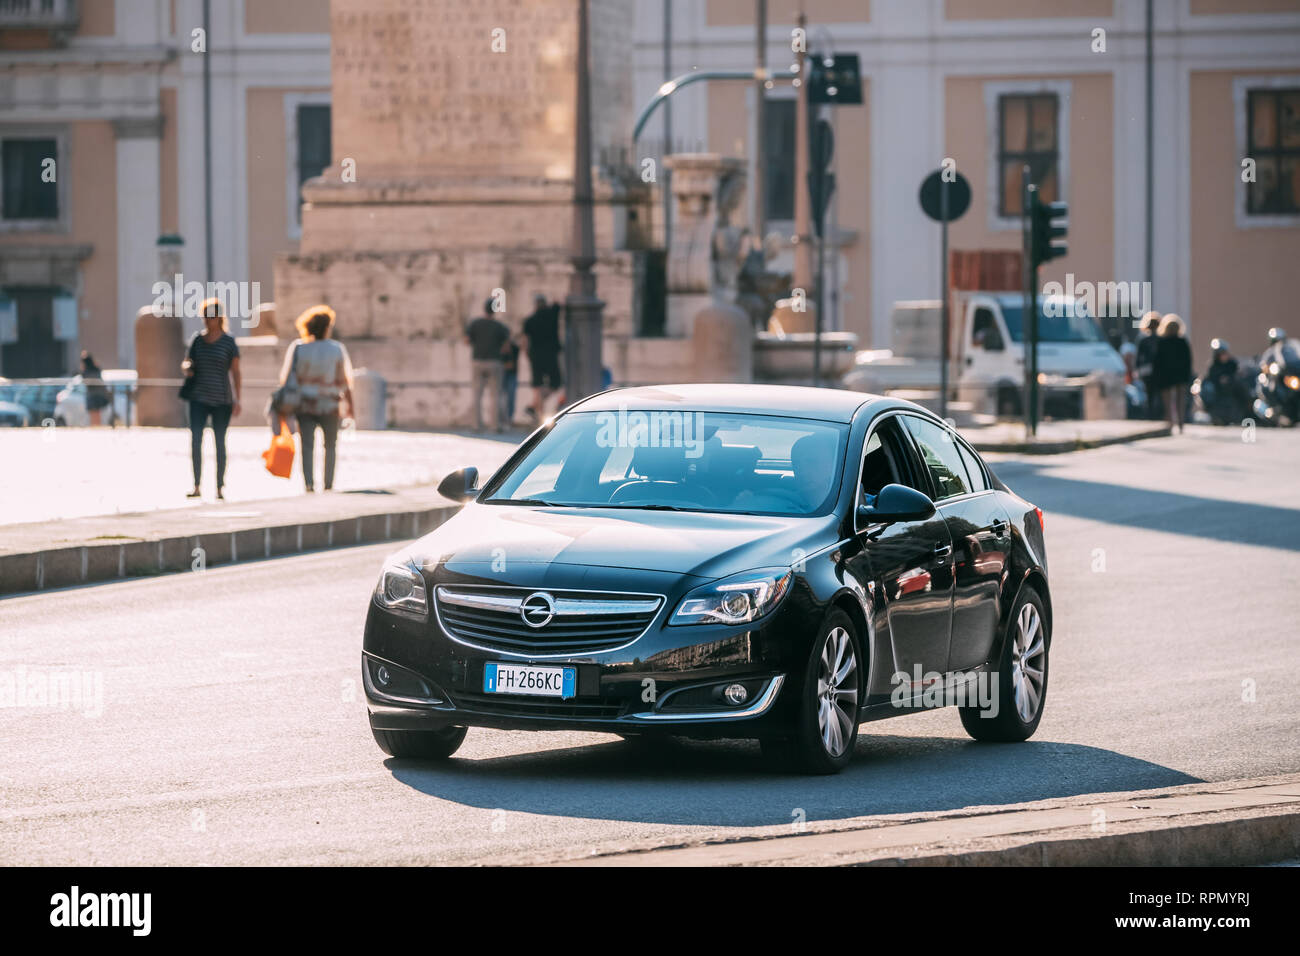 Rome, Italy - October 19, 2018: Black Color Opel Insignia With Face-lift In First Generation Moving At Street. Insignia is a family car engineered and Stock Photo